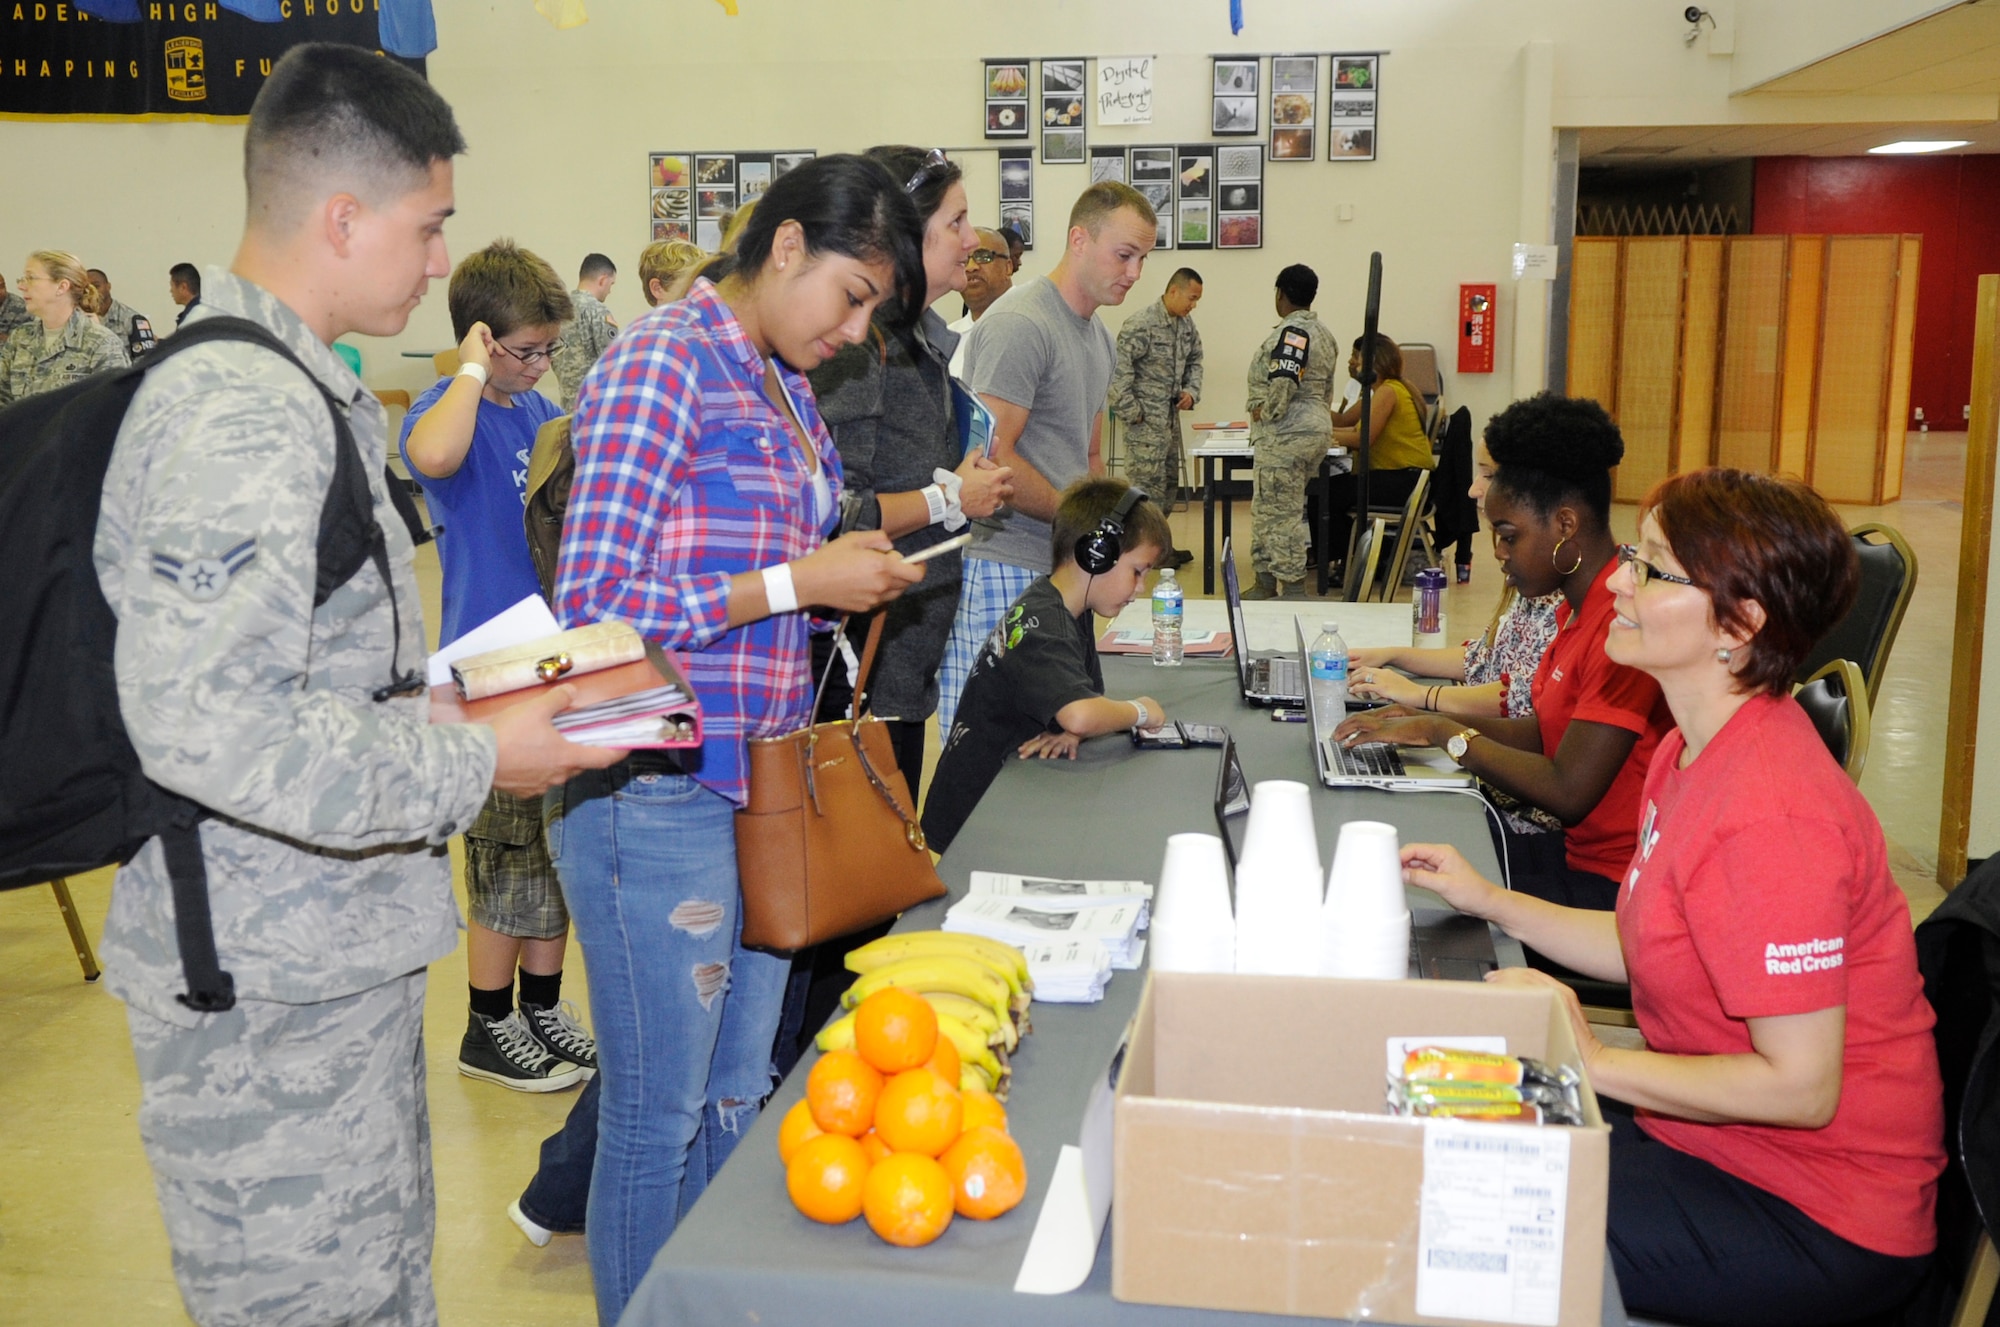 Volunteers answer questions the Non-combatant Evacuation Operation (NEO) volunteers have during a NEO exercise on Kadena Air Base, Japan, April 8, 2015. This NEO exercise was set up by the Airman and Family Readiness Center to help dependants and other non-combatants understand the evacuation process in the event of an emergency that would make it unsafe for them to remain on island. (U.S. Air Force photo/Staff Sgt. Marcus Morris)